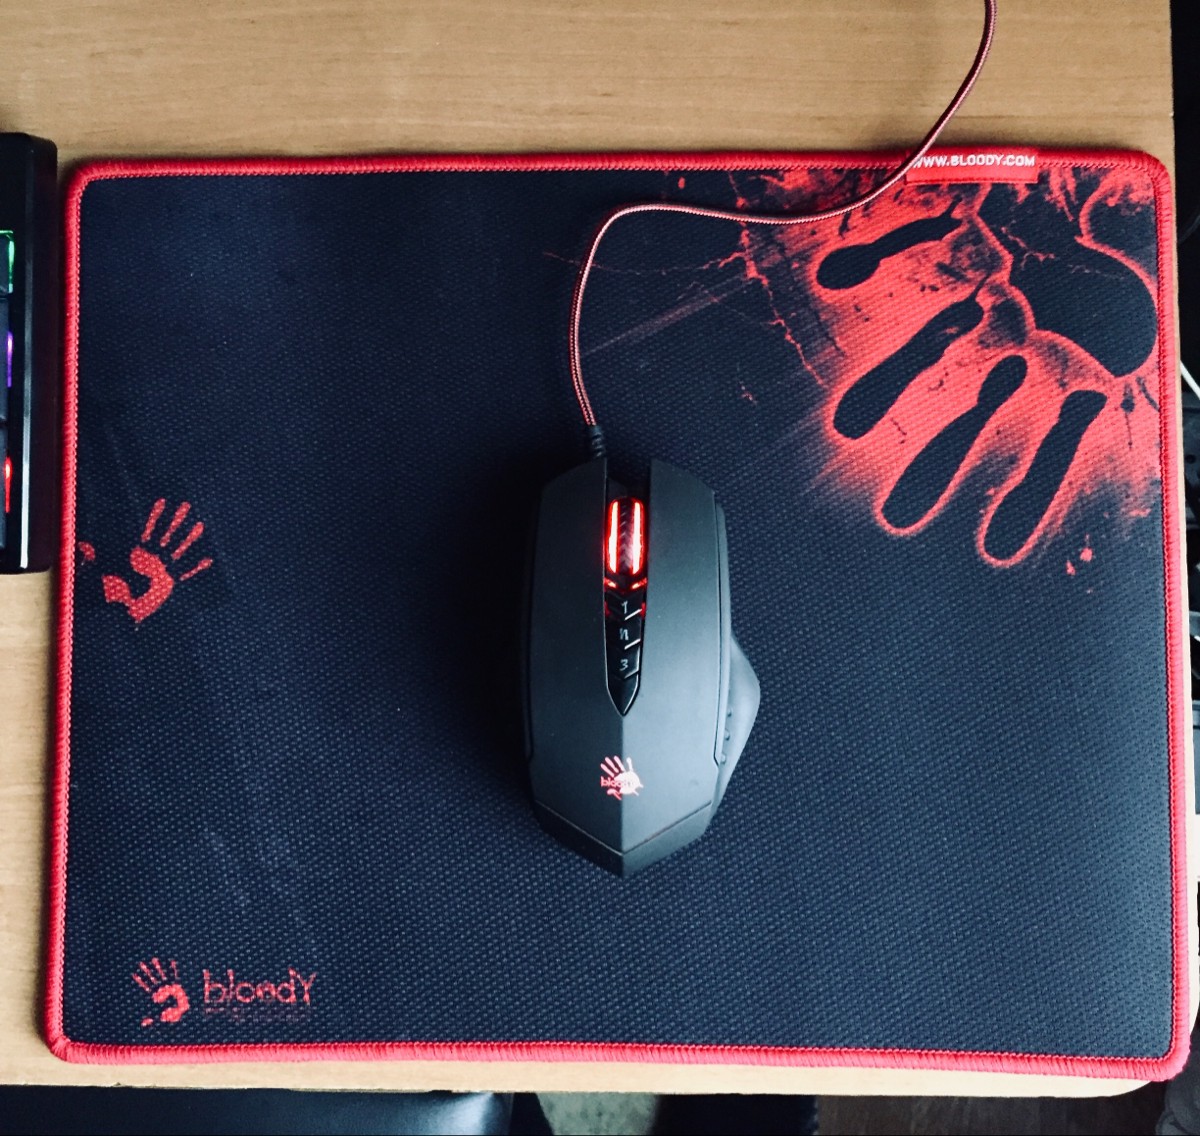 Blacklisted device bloody mouse a4tech rust фото 99